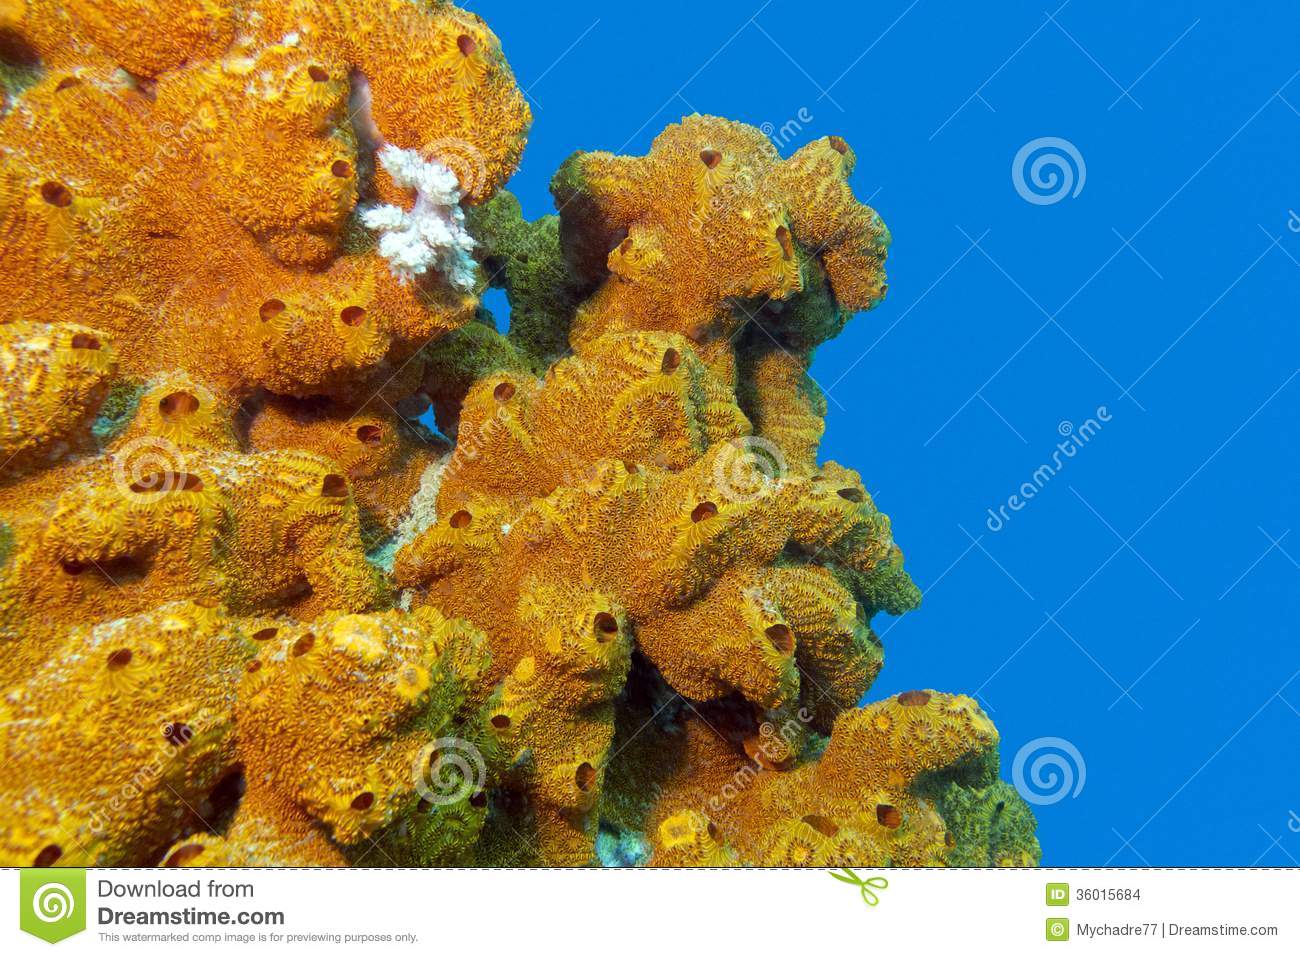 Coral Reef With Sea Sponge On Bottom Of Tropical Sea Isolated On Blue